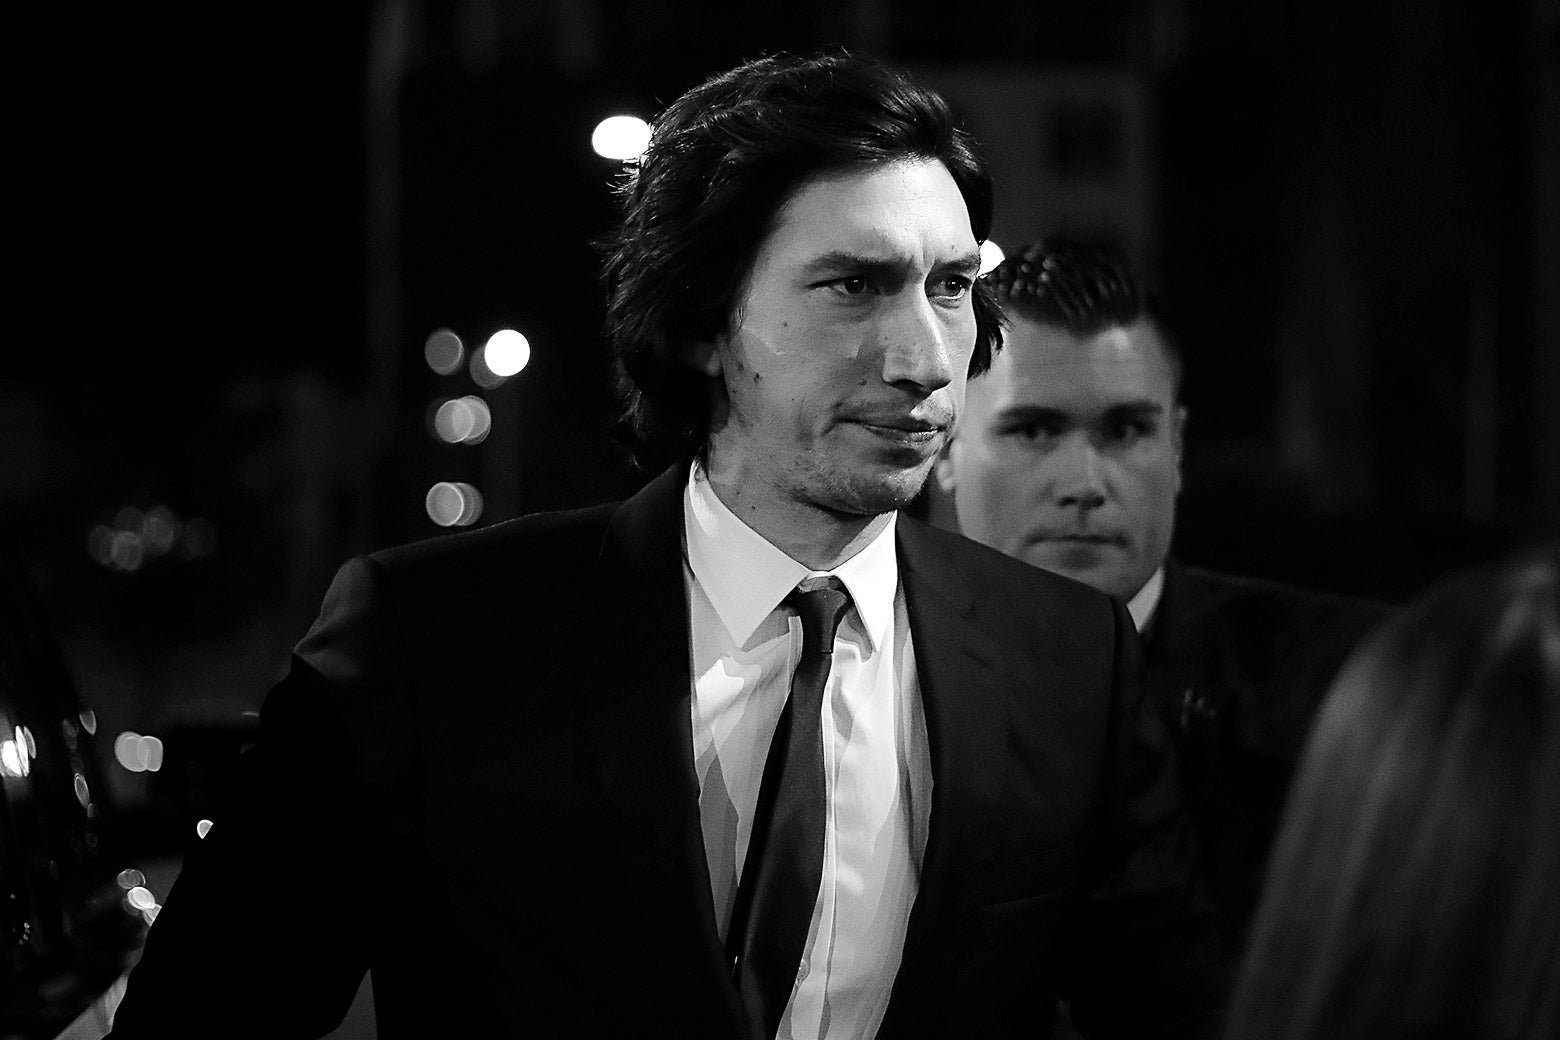 In black and white, Adam Driver wears a nice suit.